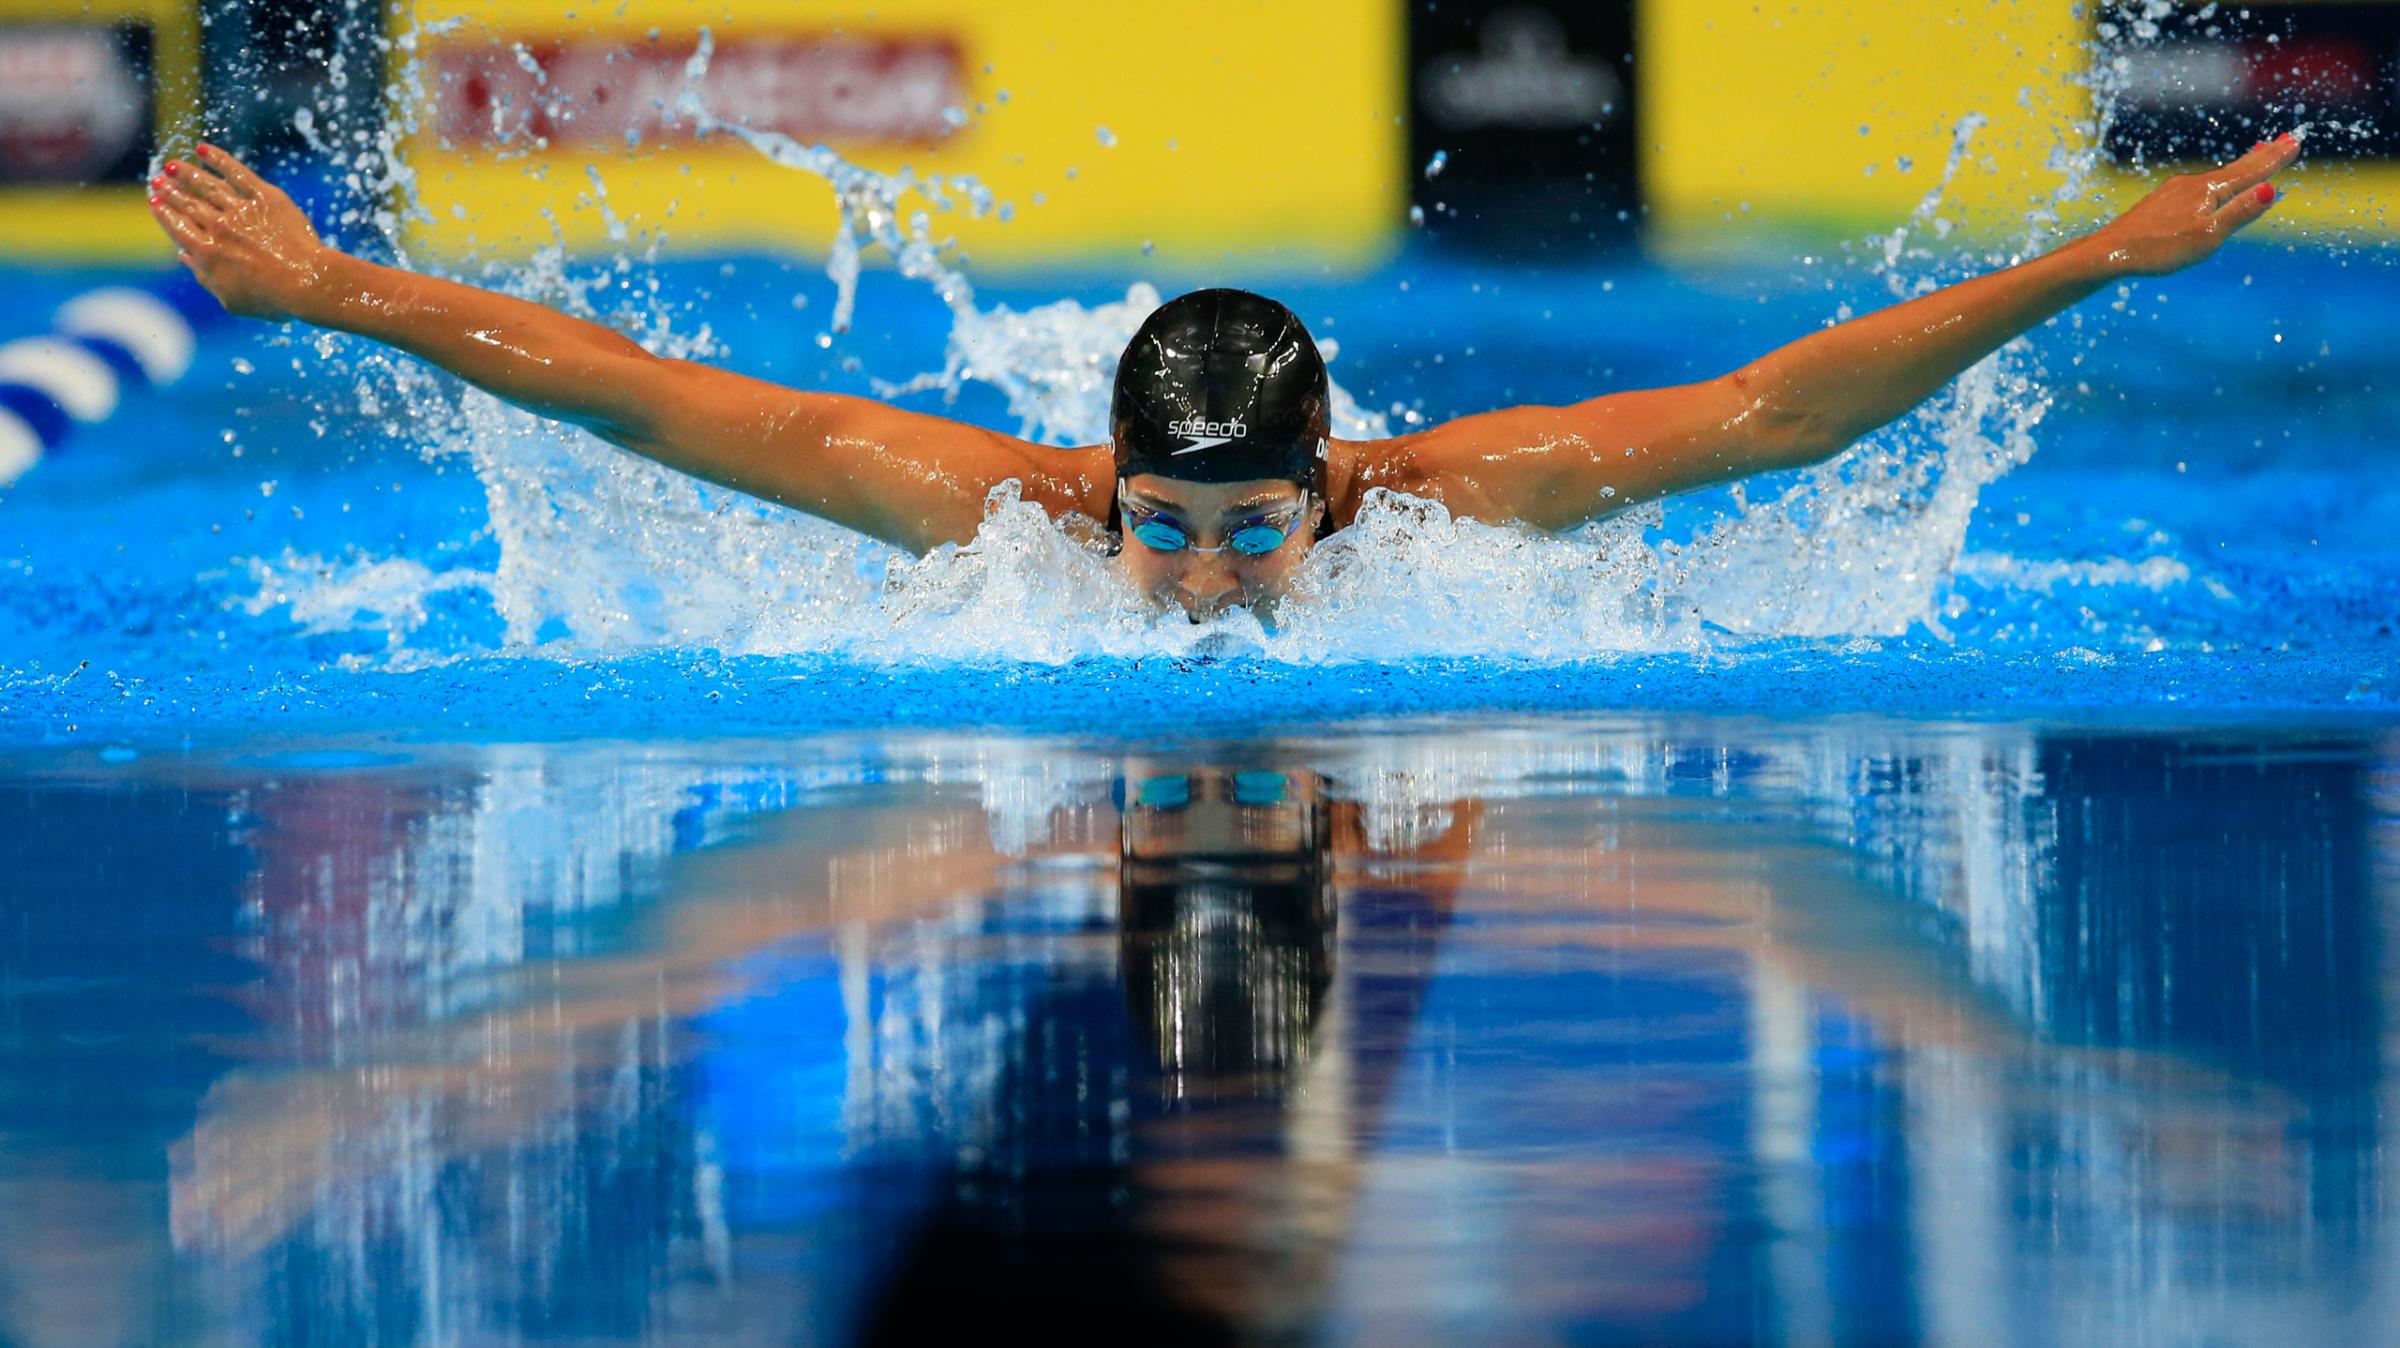 Maya DiRado—DiRado will join Michael Phelps and Katie Ledecky as the only U.S. swimmers to race in three individual events. The Stanford graduate will go head-to-head against reigning Olympic champion and teammate Missy Franklin in the 200-m backstroke.